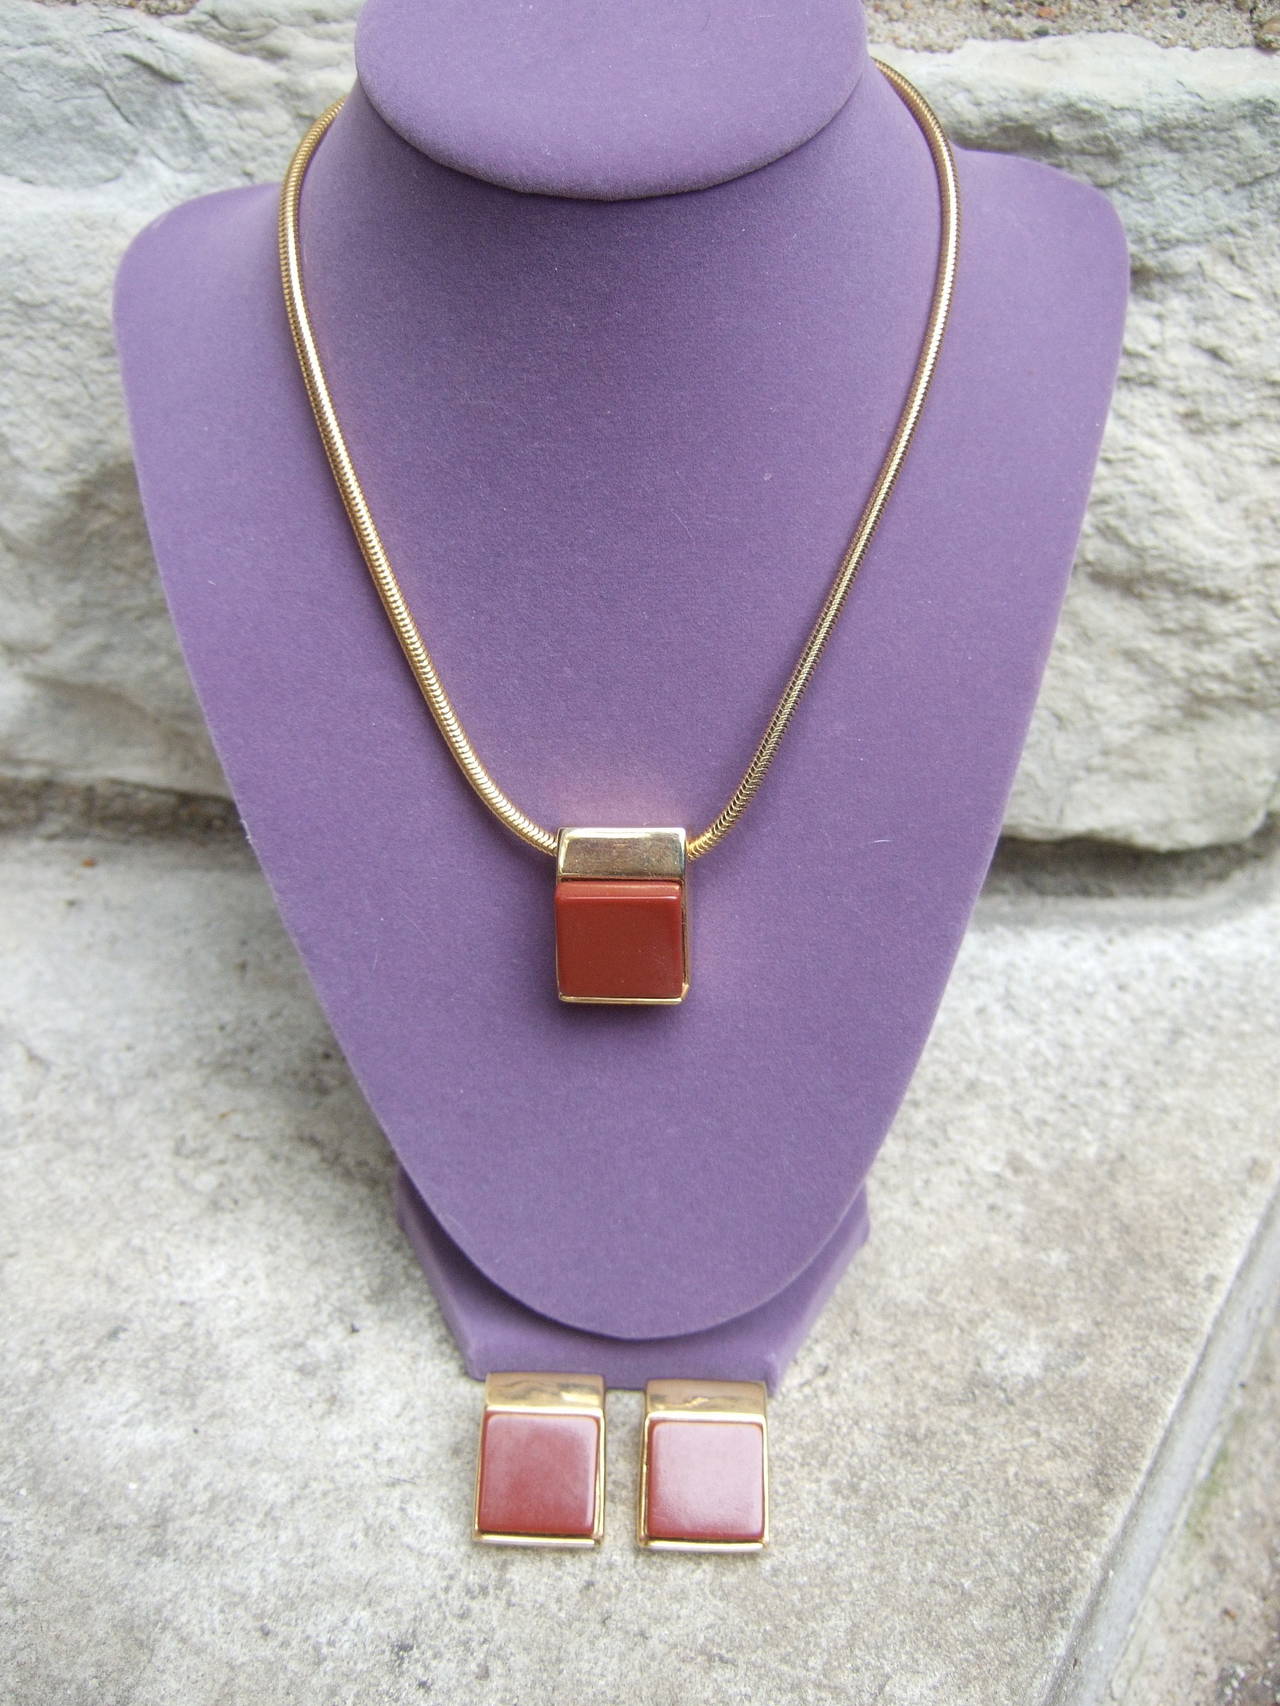 Pierre Cardin Sleek cinnabar resin necklace & earrings c 1970
The minimal design is embellished with a resin cinnabar color
cube pendant at the center of the necklace that hangs from a 
gilt metal snake chain

The clip on earrings echo the